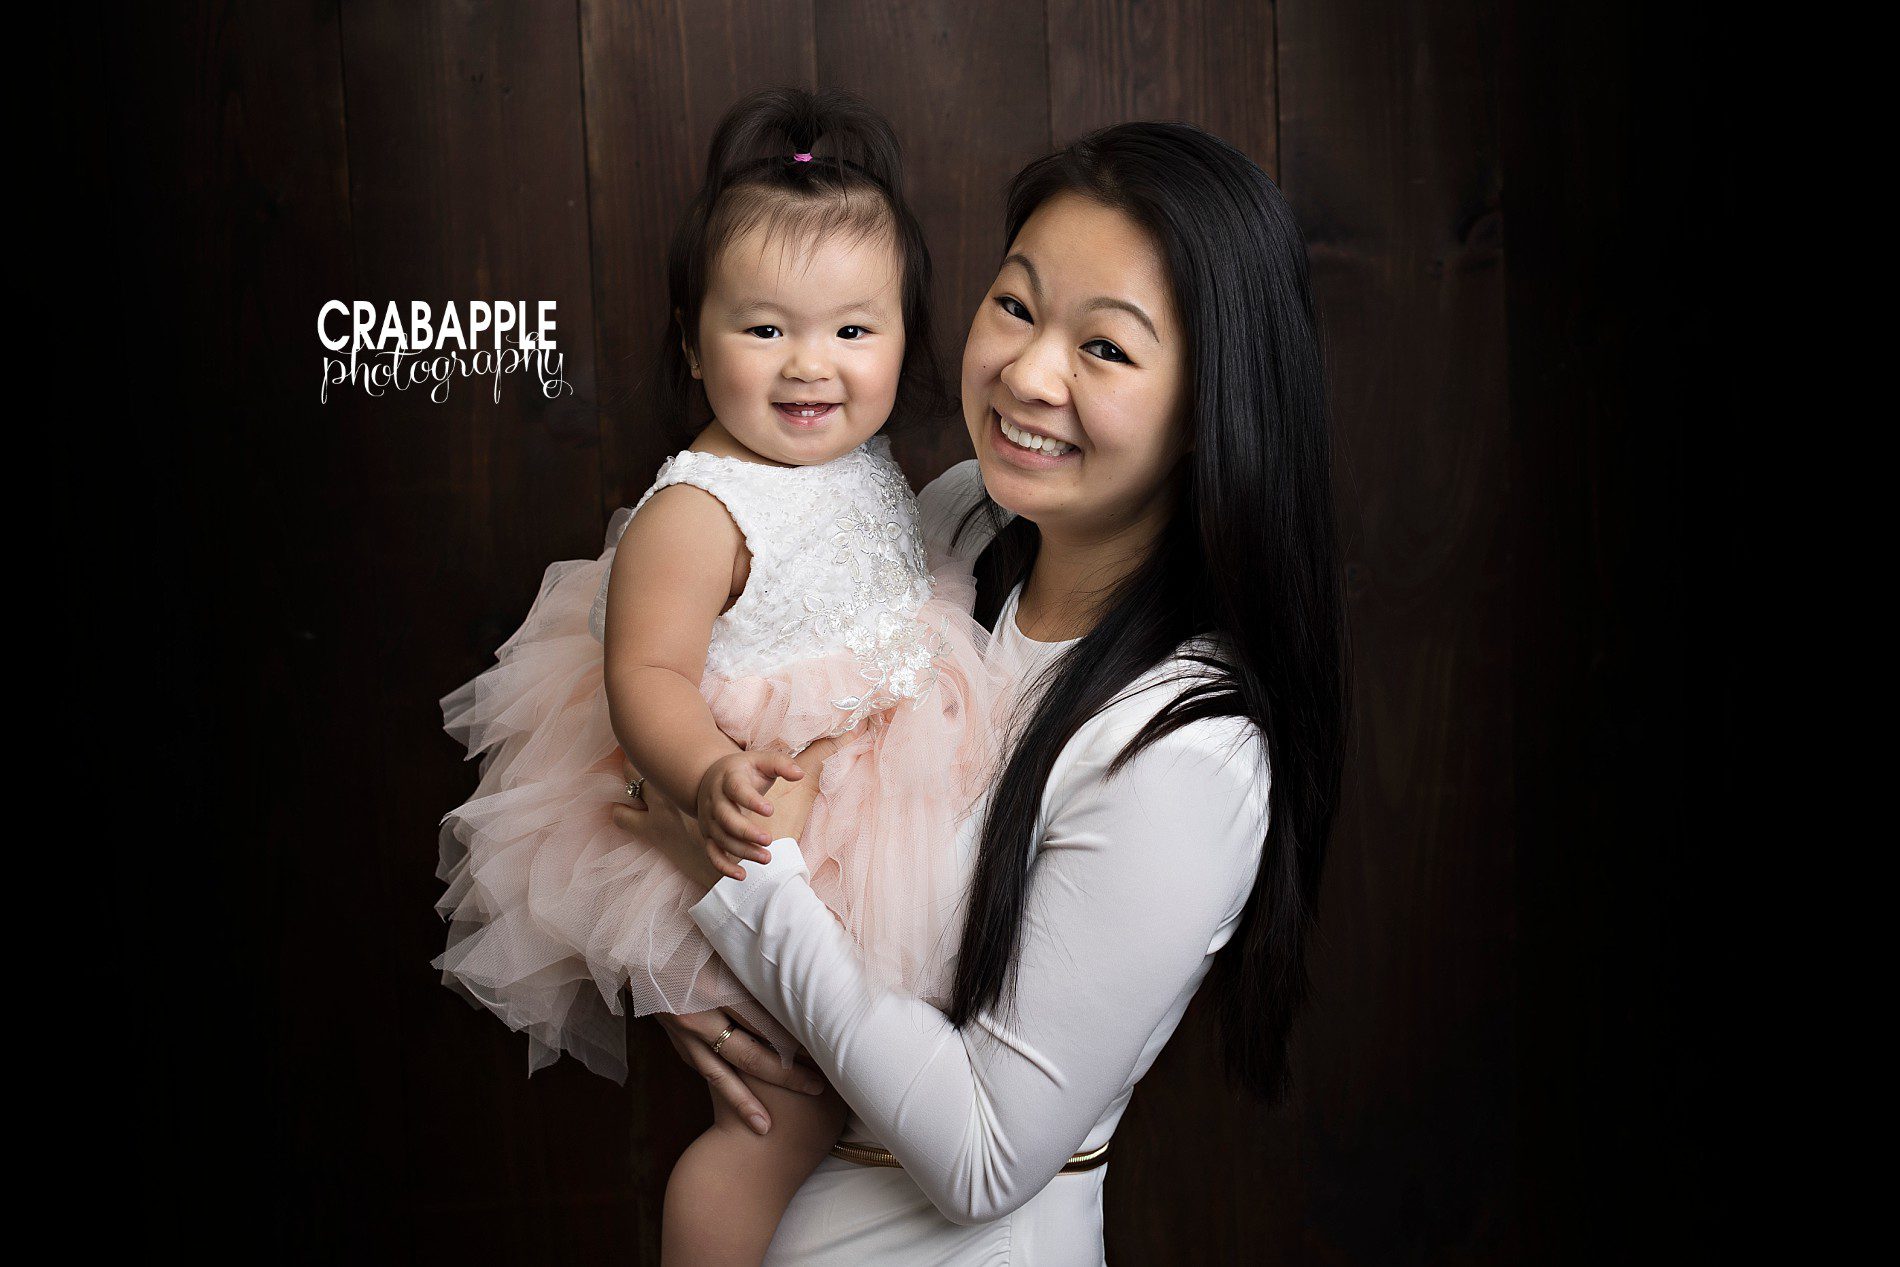 mother daughter photo ideas for baby's first birthday